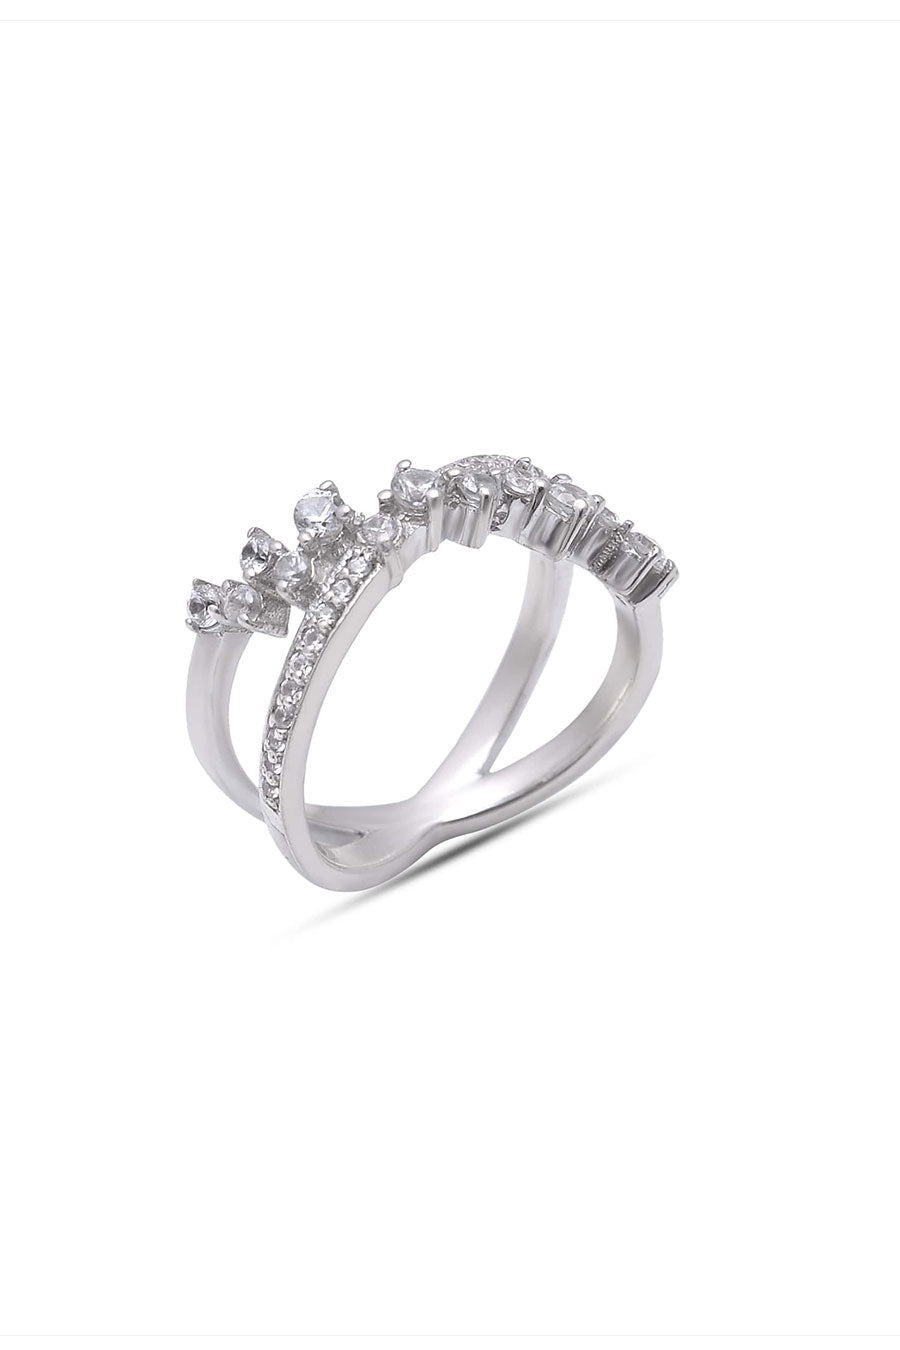 Criss Cross Silver Ring in 925 Silver